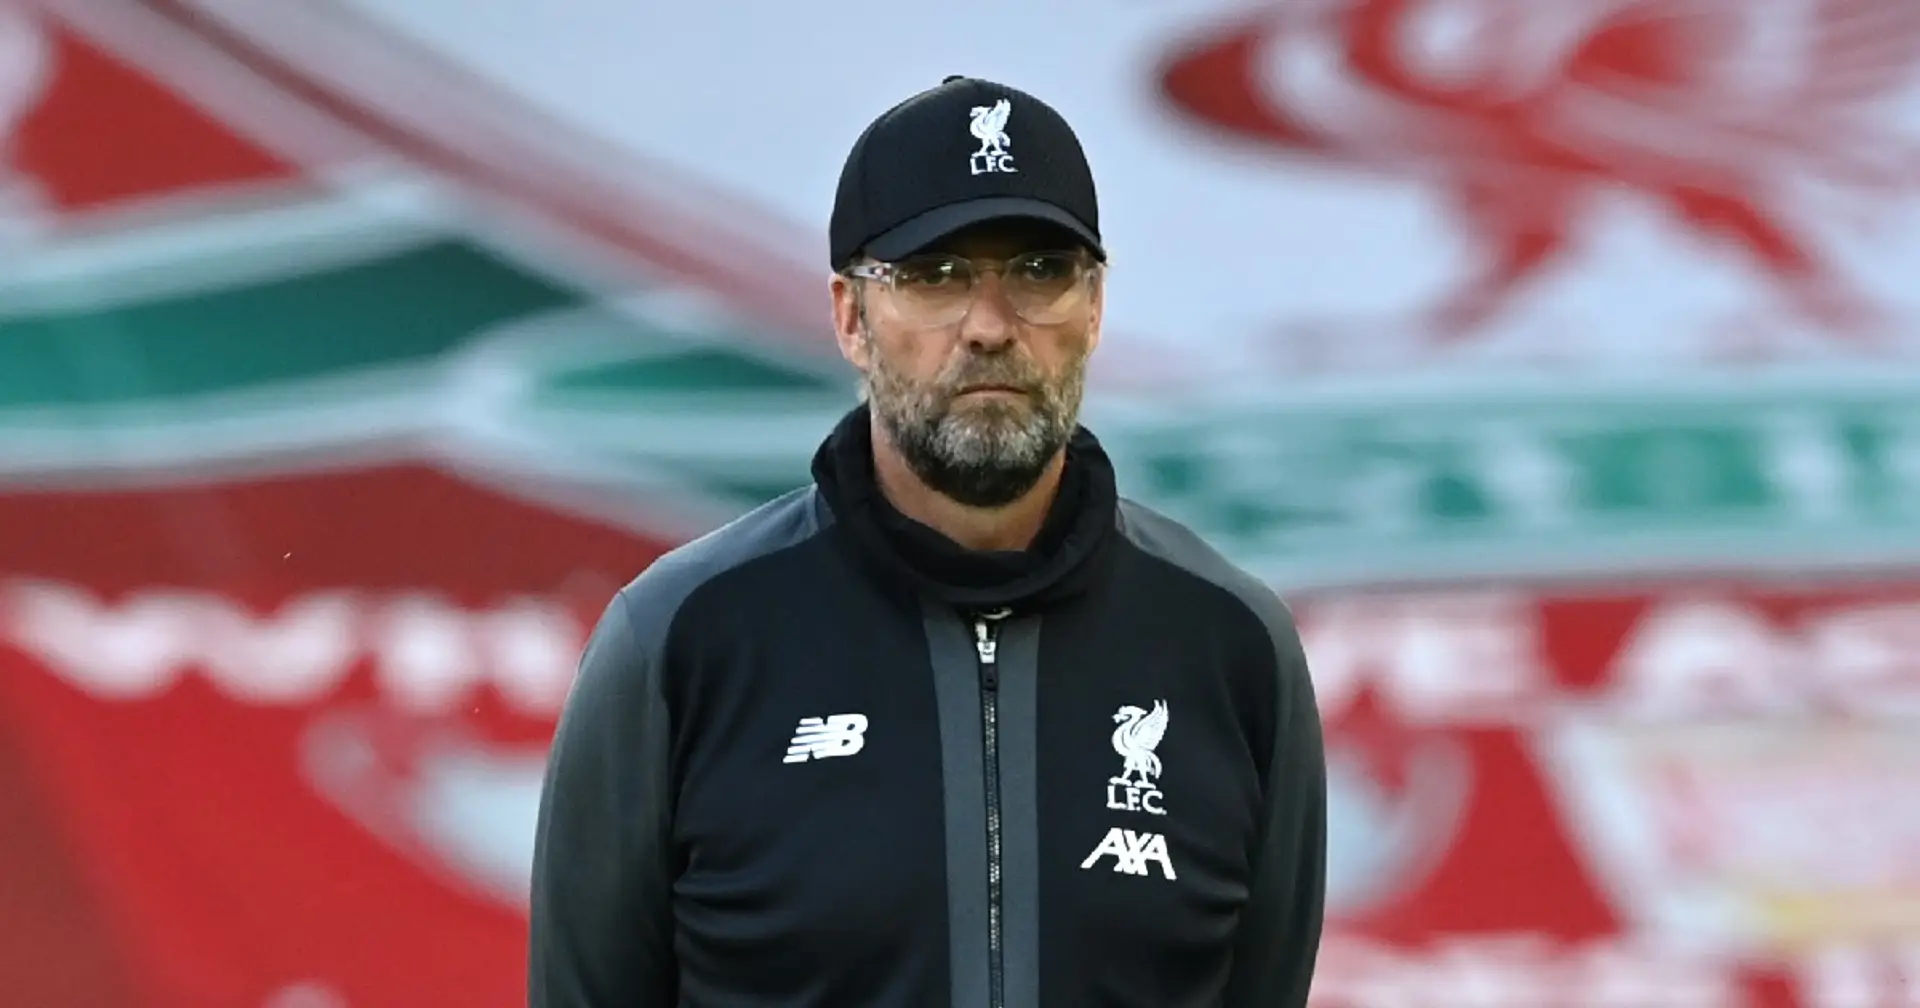 'It will surpass his Dortmund title': Liverpool fan suggests title win this season would be Klopp's greatest miracle